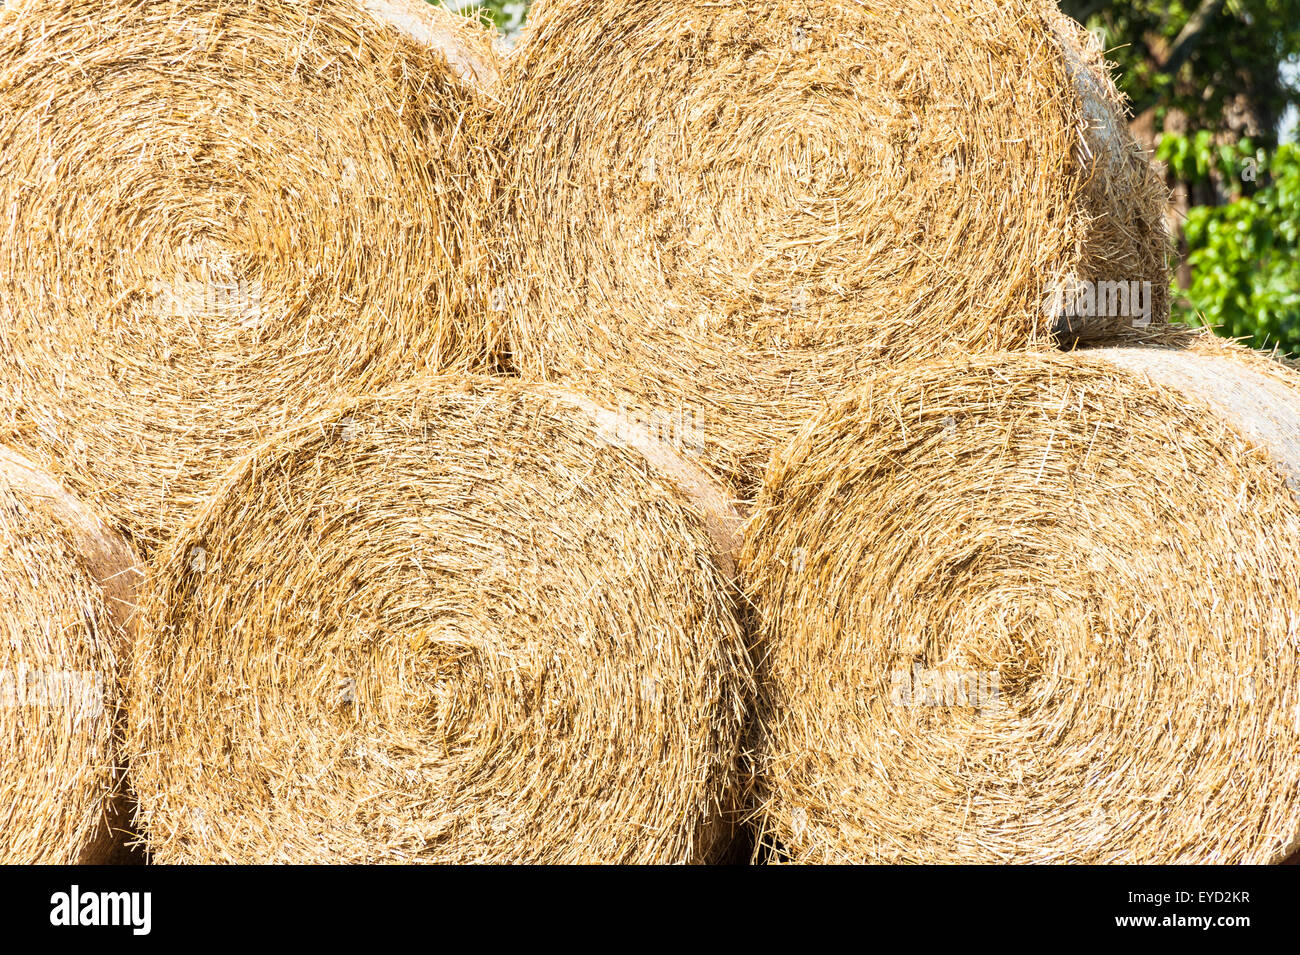 Bales of straw stacked to dry in the sun Stock Photo